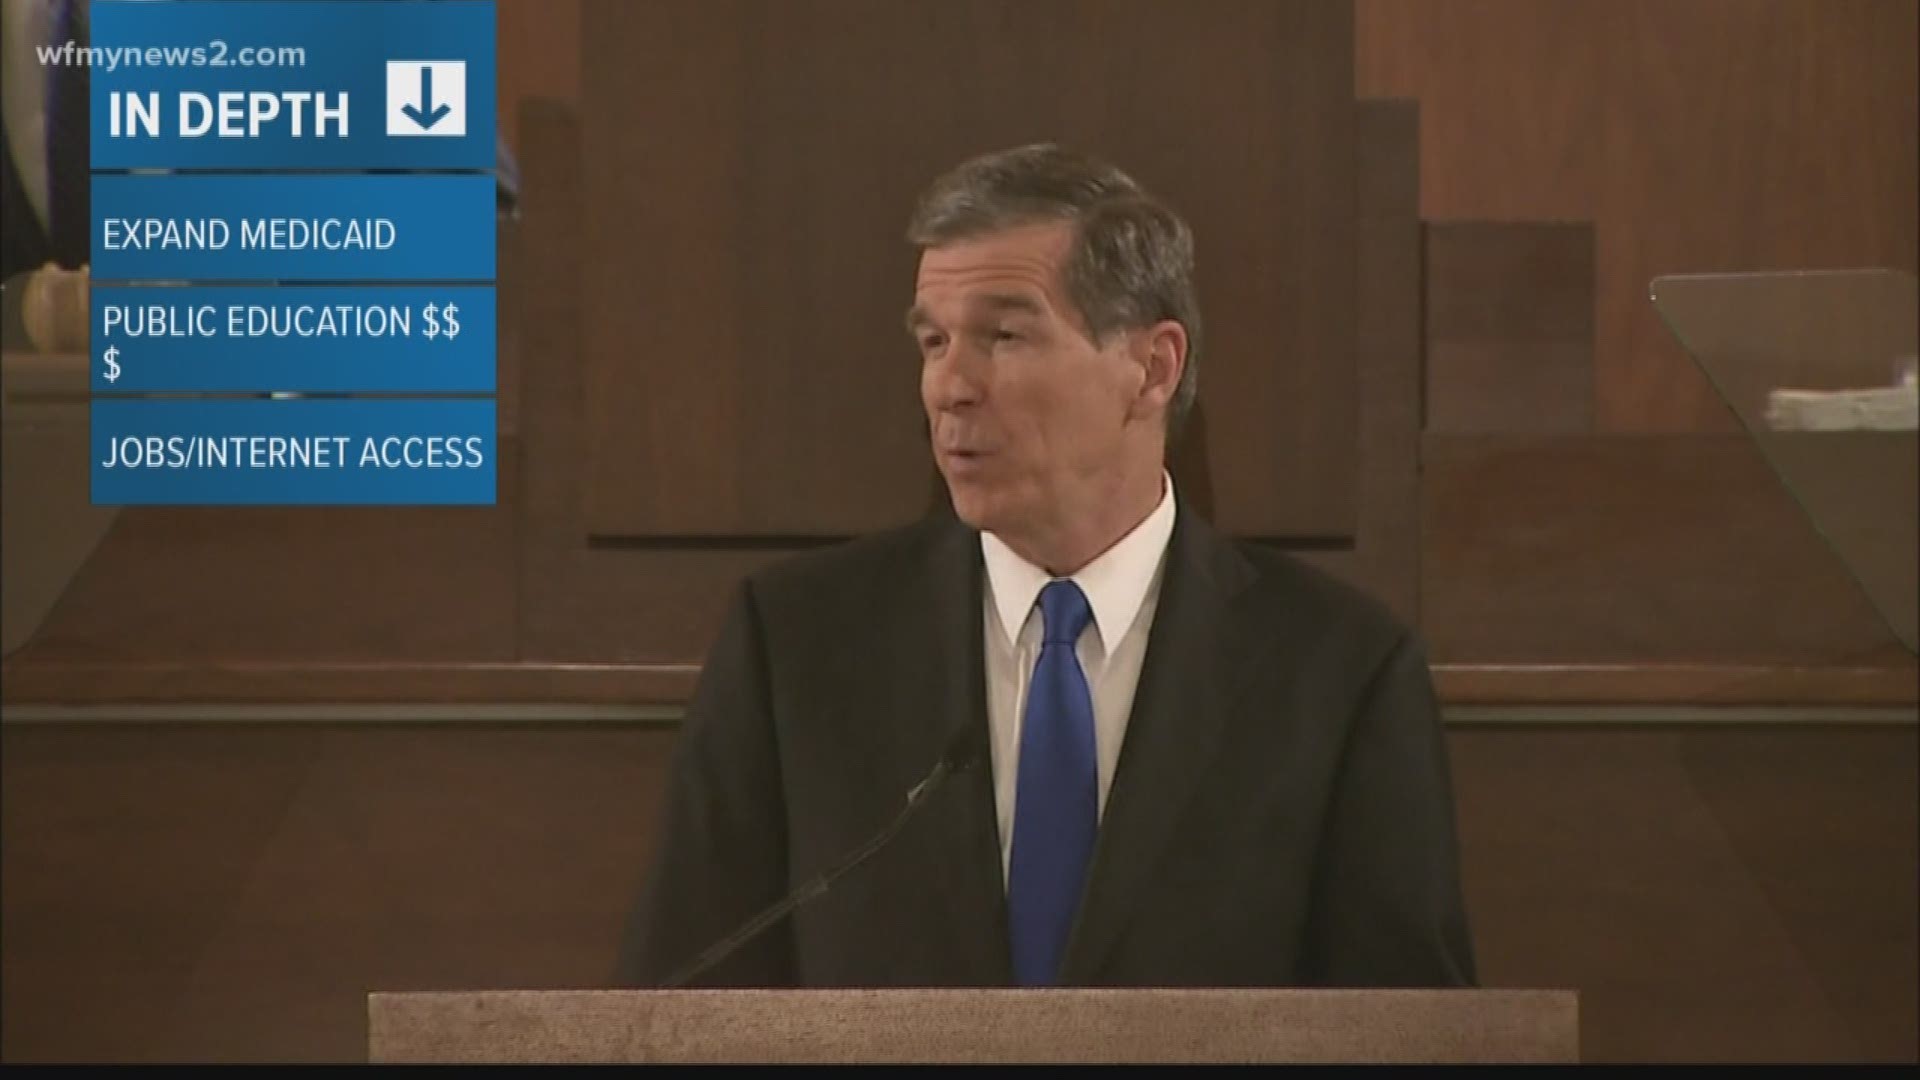 Governor Cooper wants lawmakers to expand Medicaid, increase public education funding and increase access to jobs and the internet, among other things.